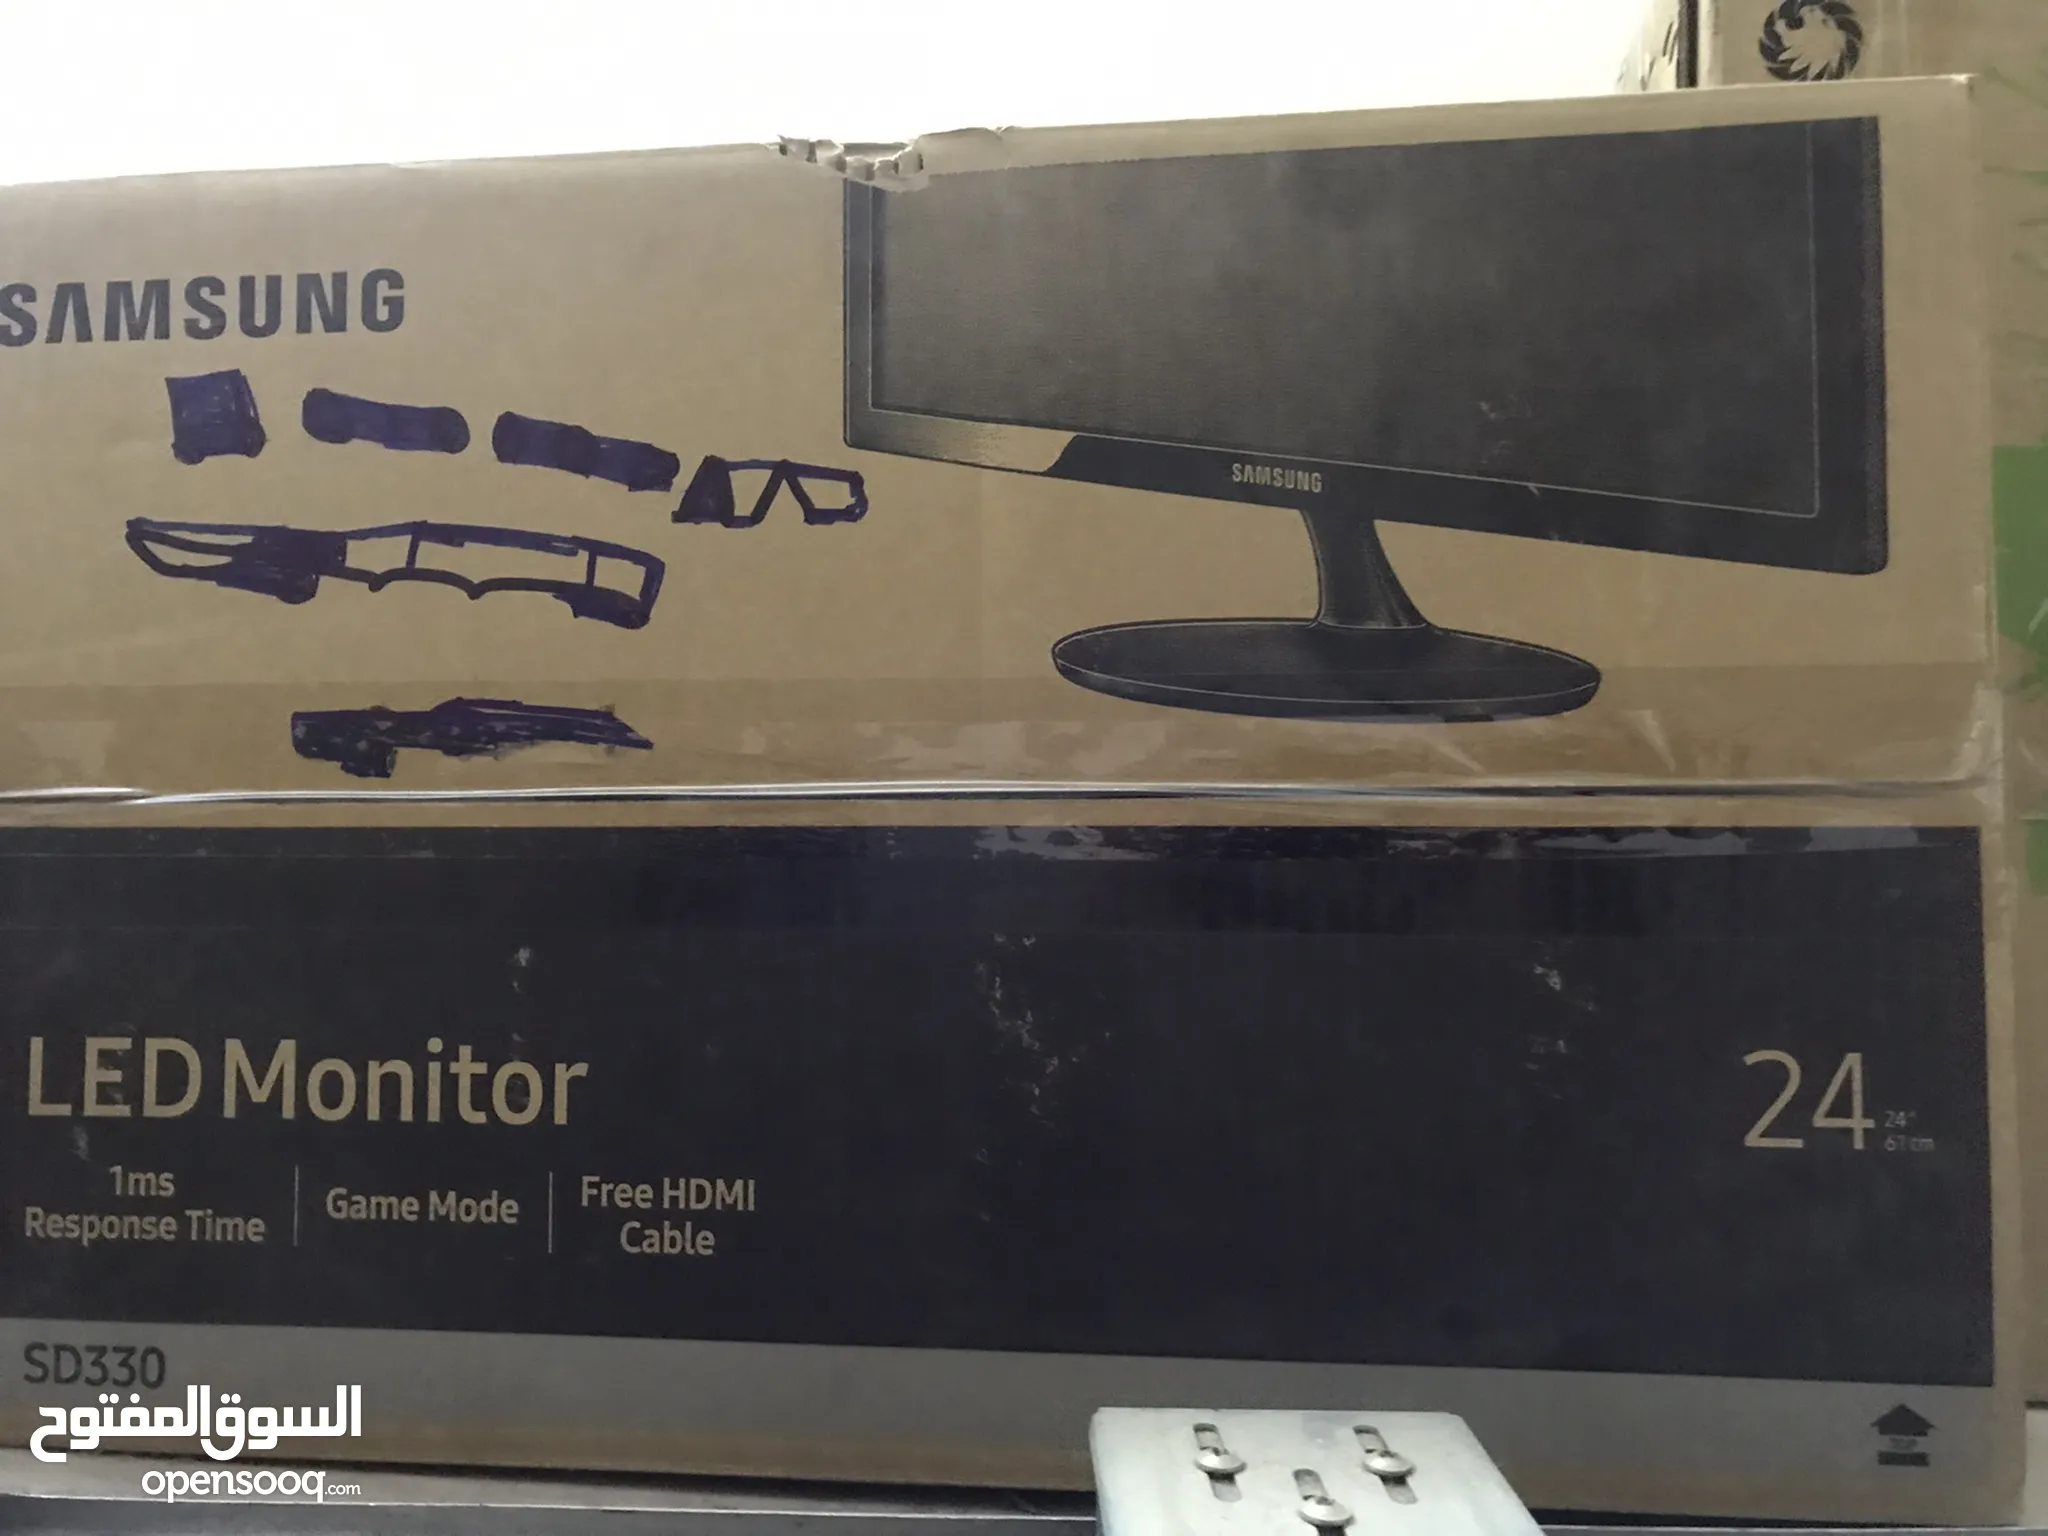 Samsung Computers & Laptops Monitors For Sale in Iraq : Prices | OpenSooq